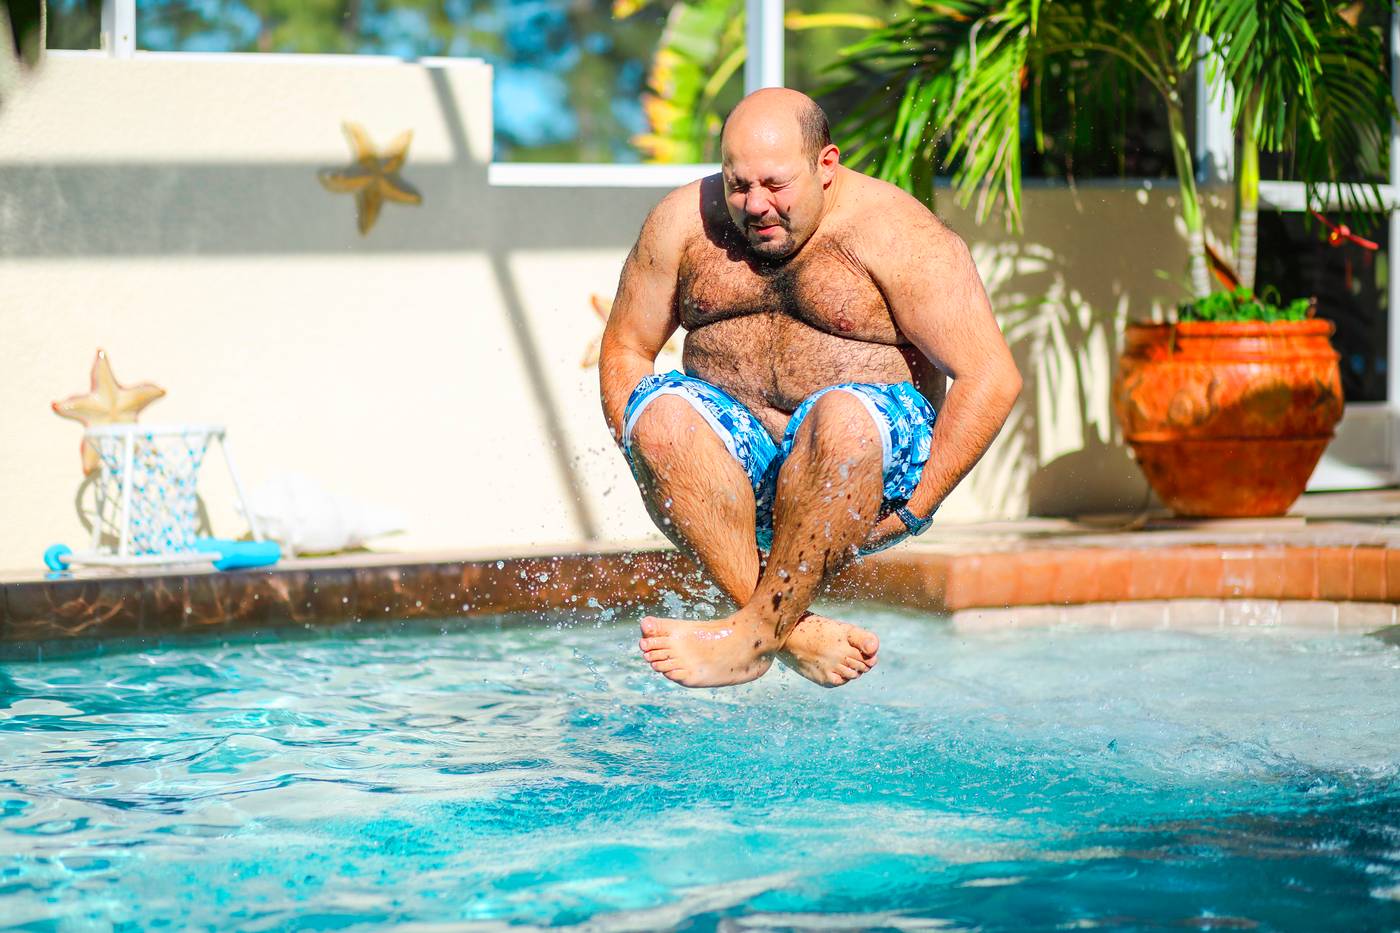 Man jumping into the pool